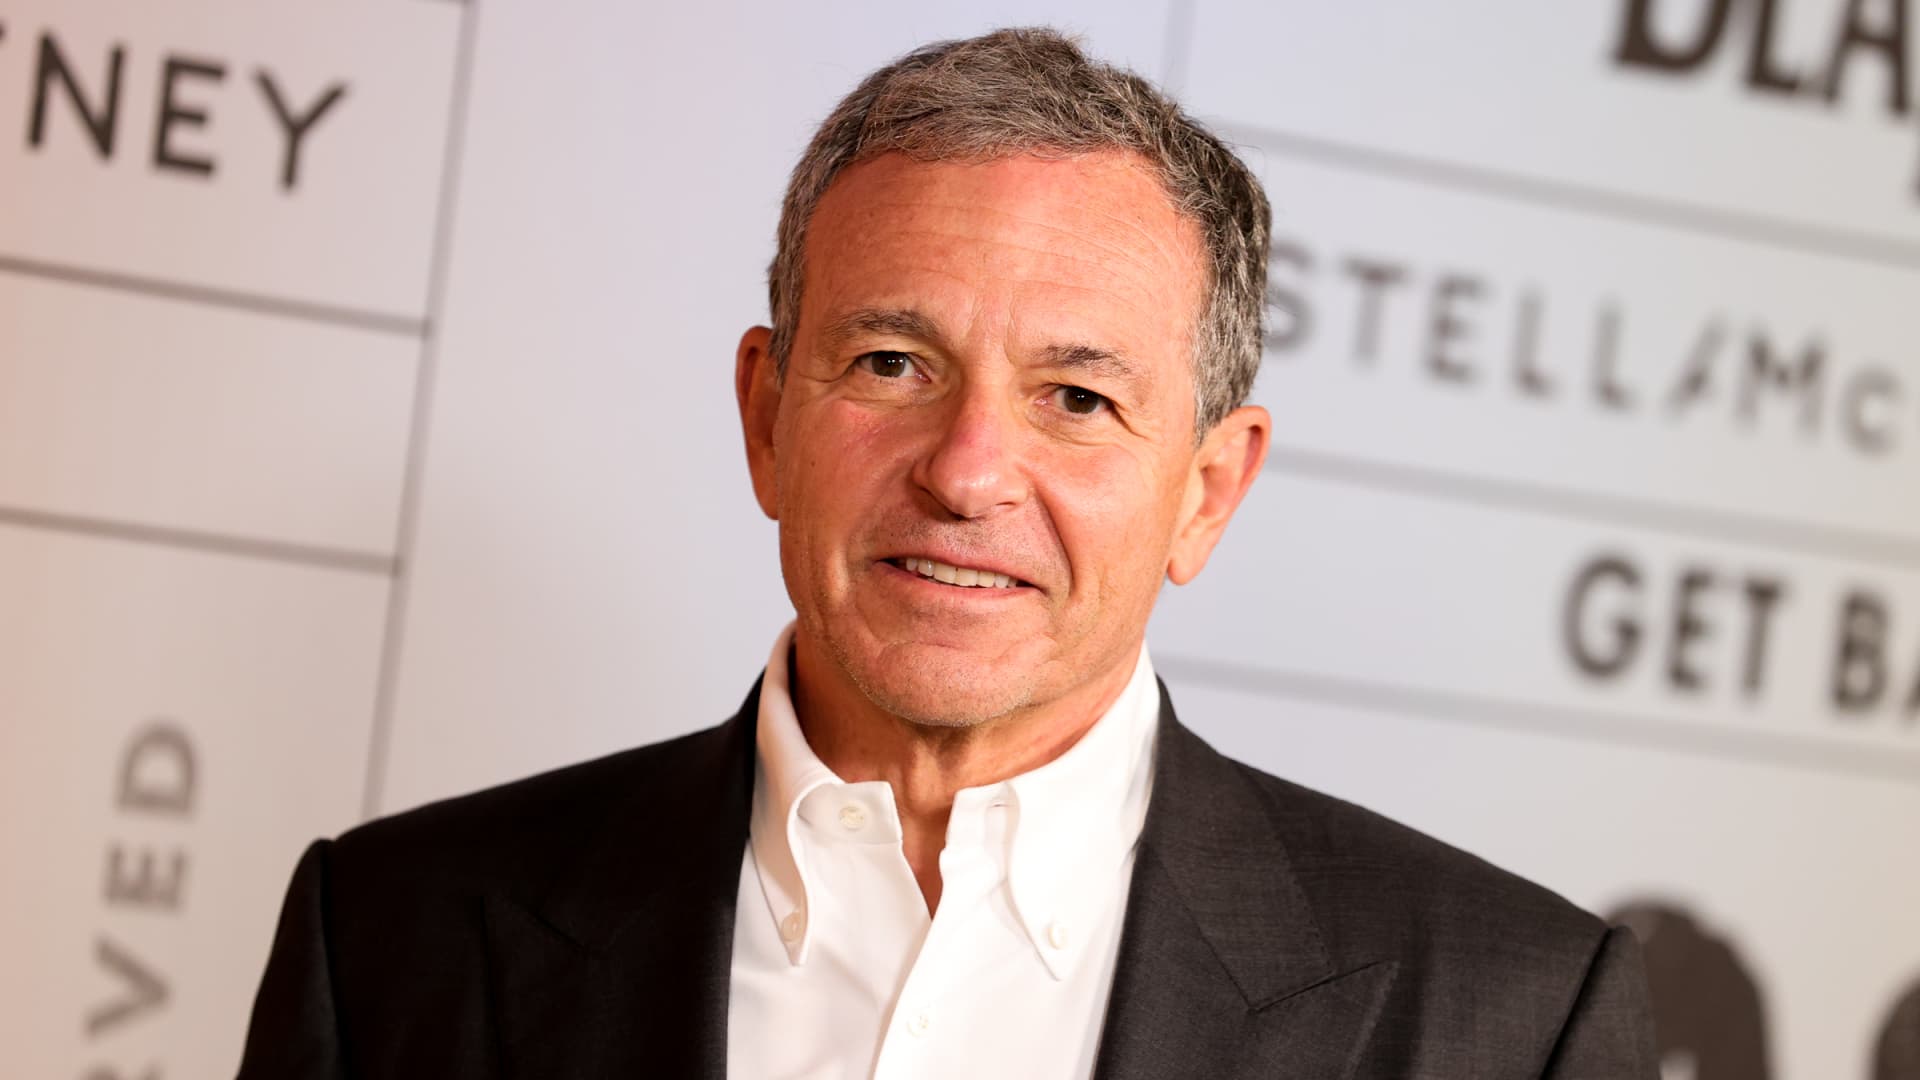 Moviegoing won’t return to pre-pandemic levels, says Disney’s Bob Iger